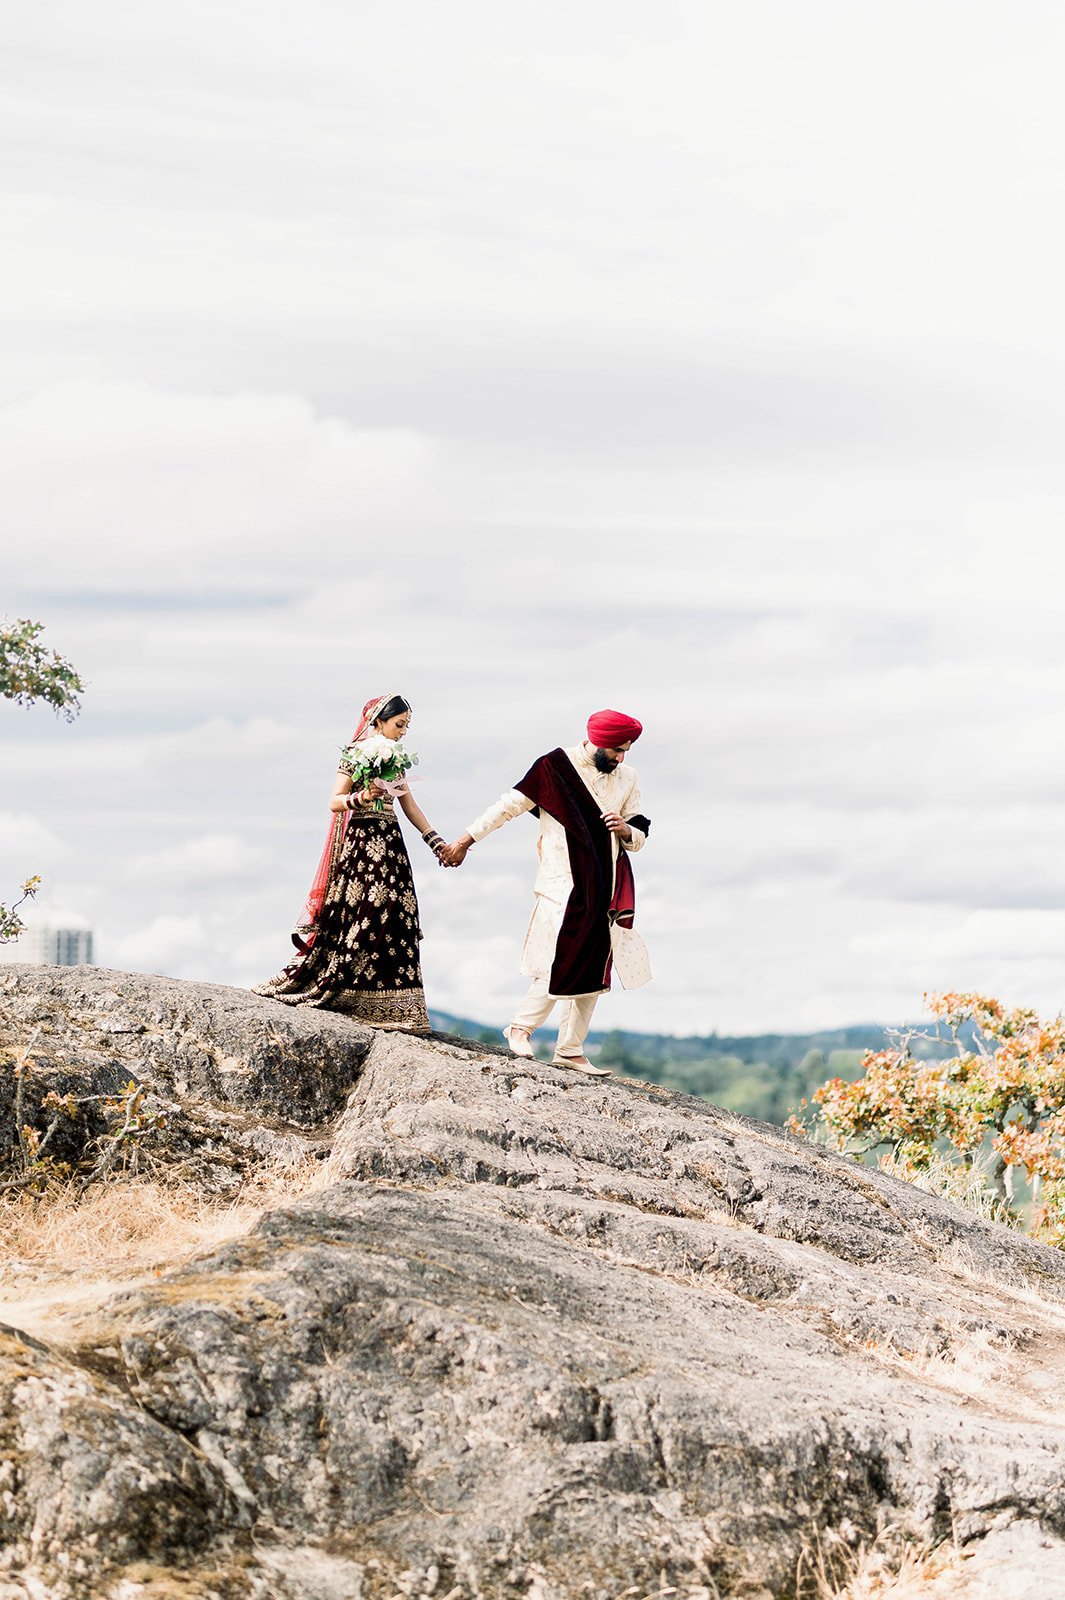 An Indian groom leads his bride down a rock formation at the end of their photoshoot in Victoria BC